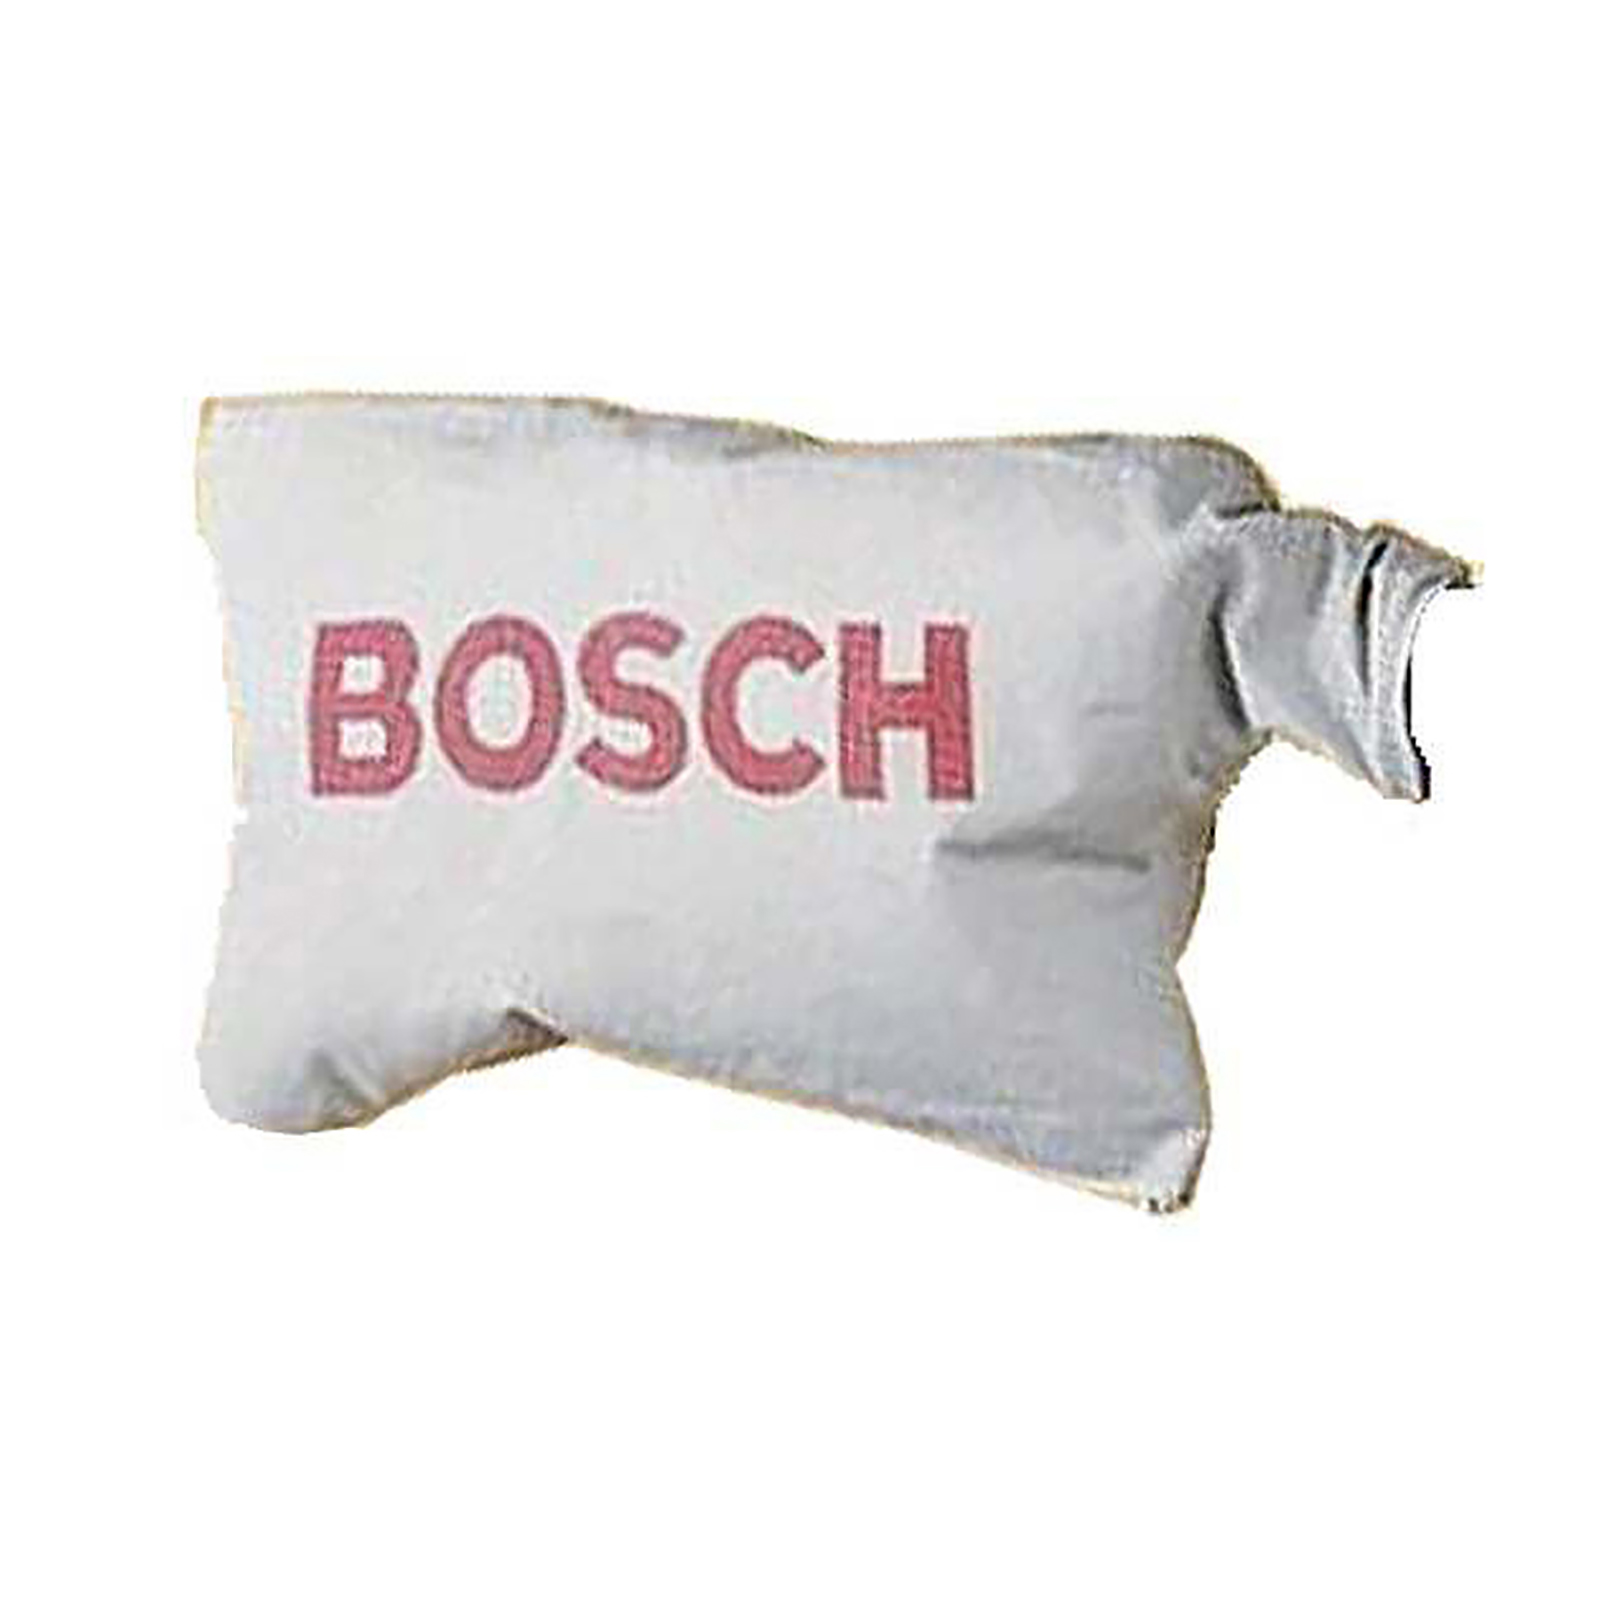 Bosch Genuine OEM Replacement Dust Bag